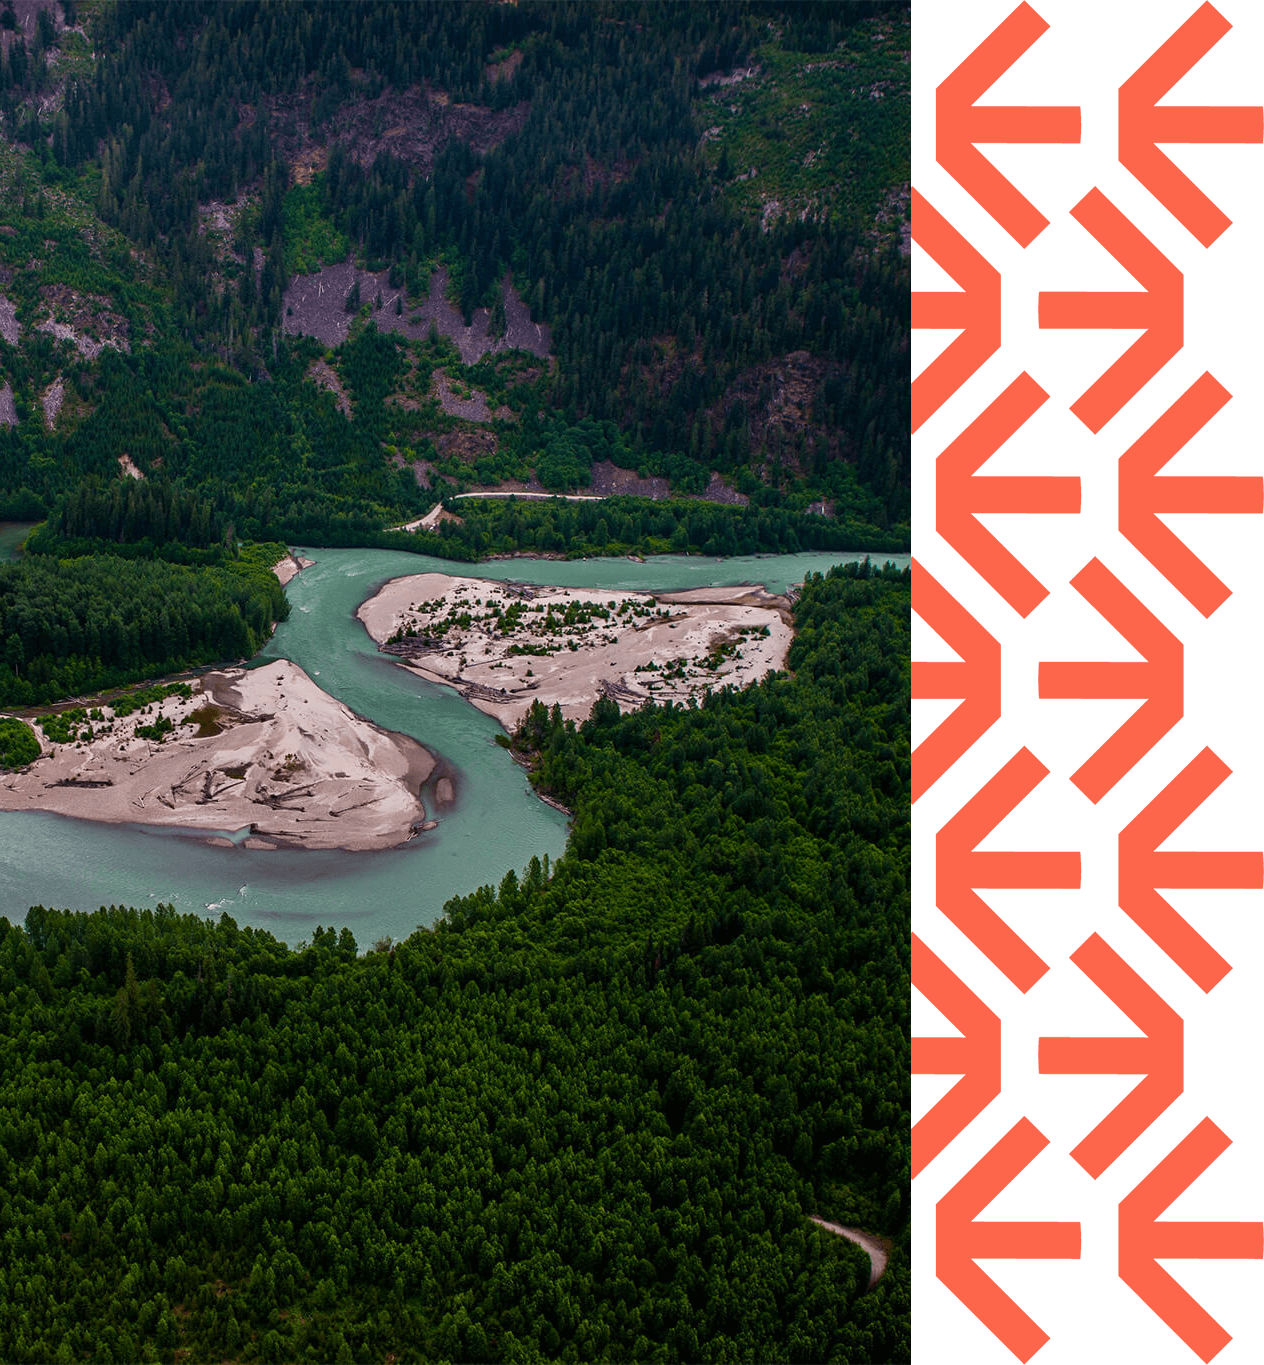 Aerial photo of Squamish Territory with lush forest and winding river with branding on the right